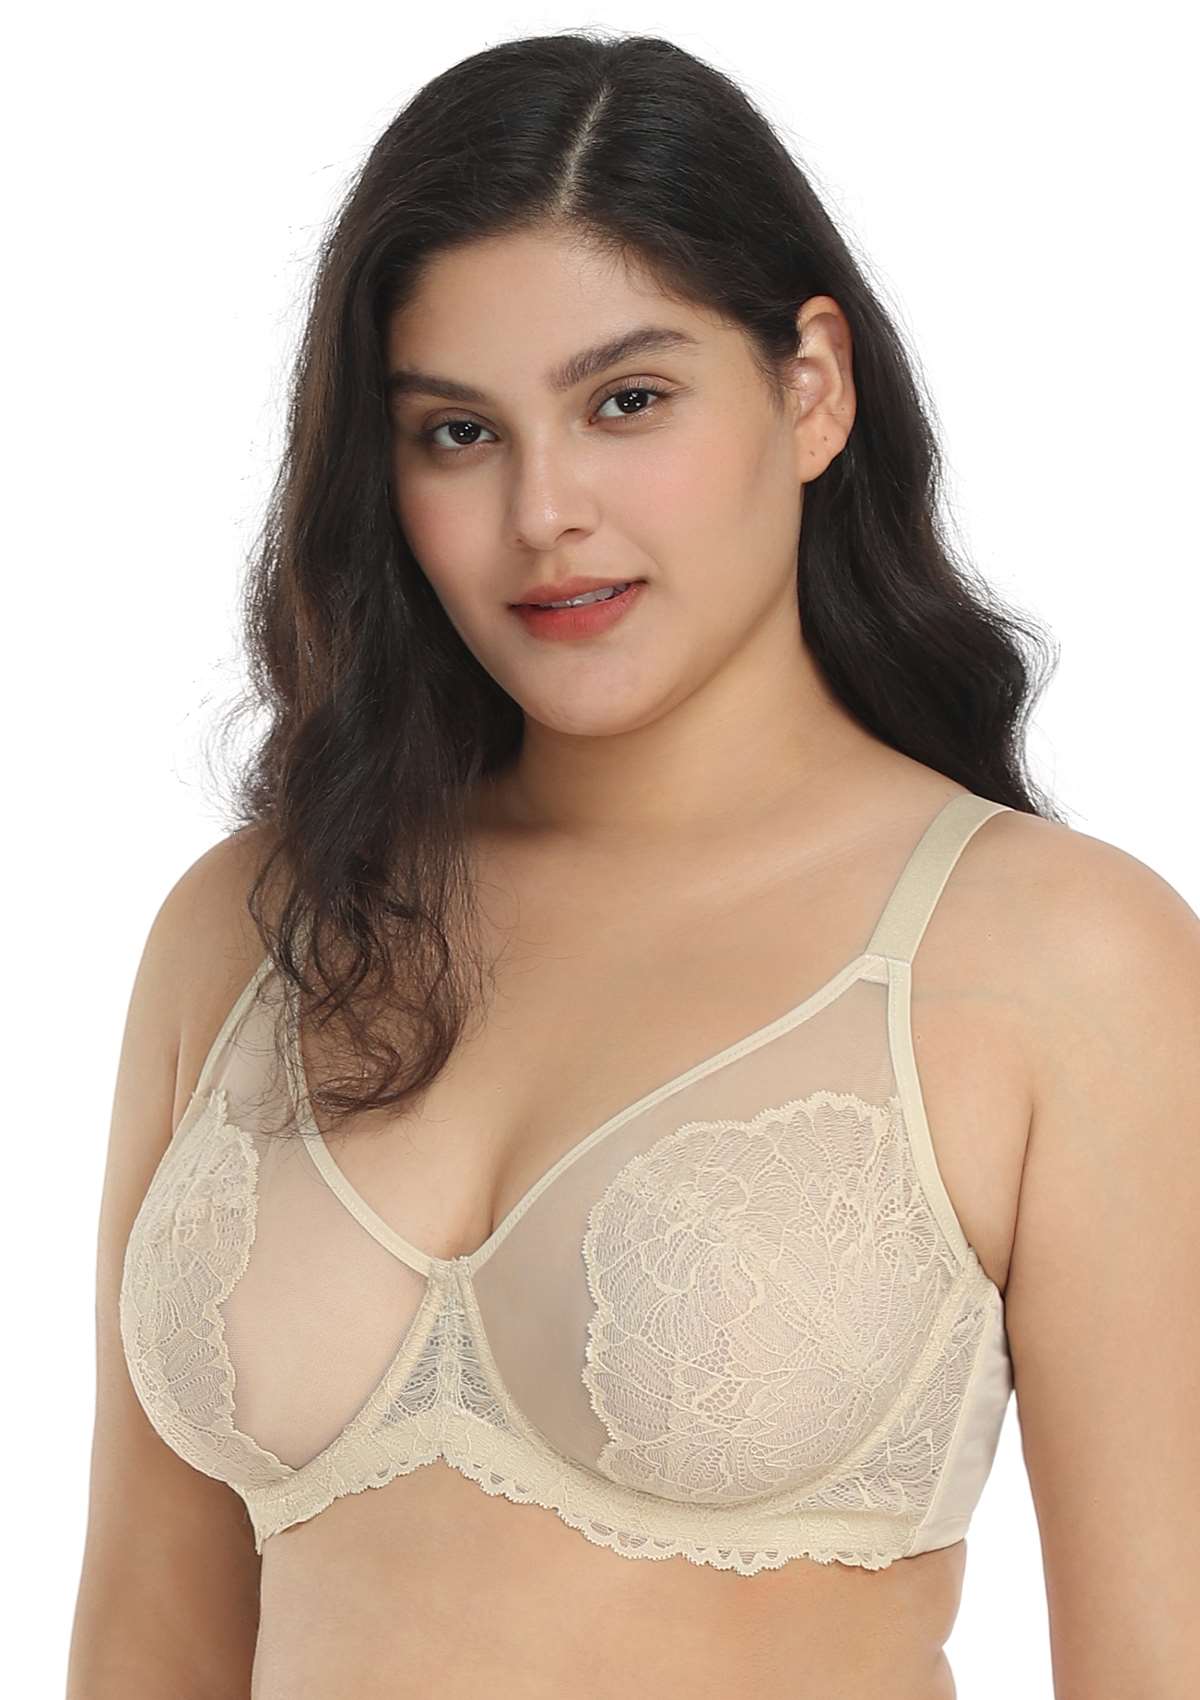 HSIA Blossom Full Coverage Side Support Bra: Designed For Heavy Busts - Beige / 46 / DD/E